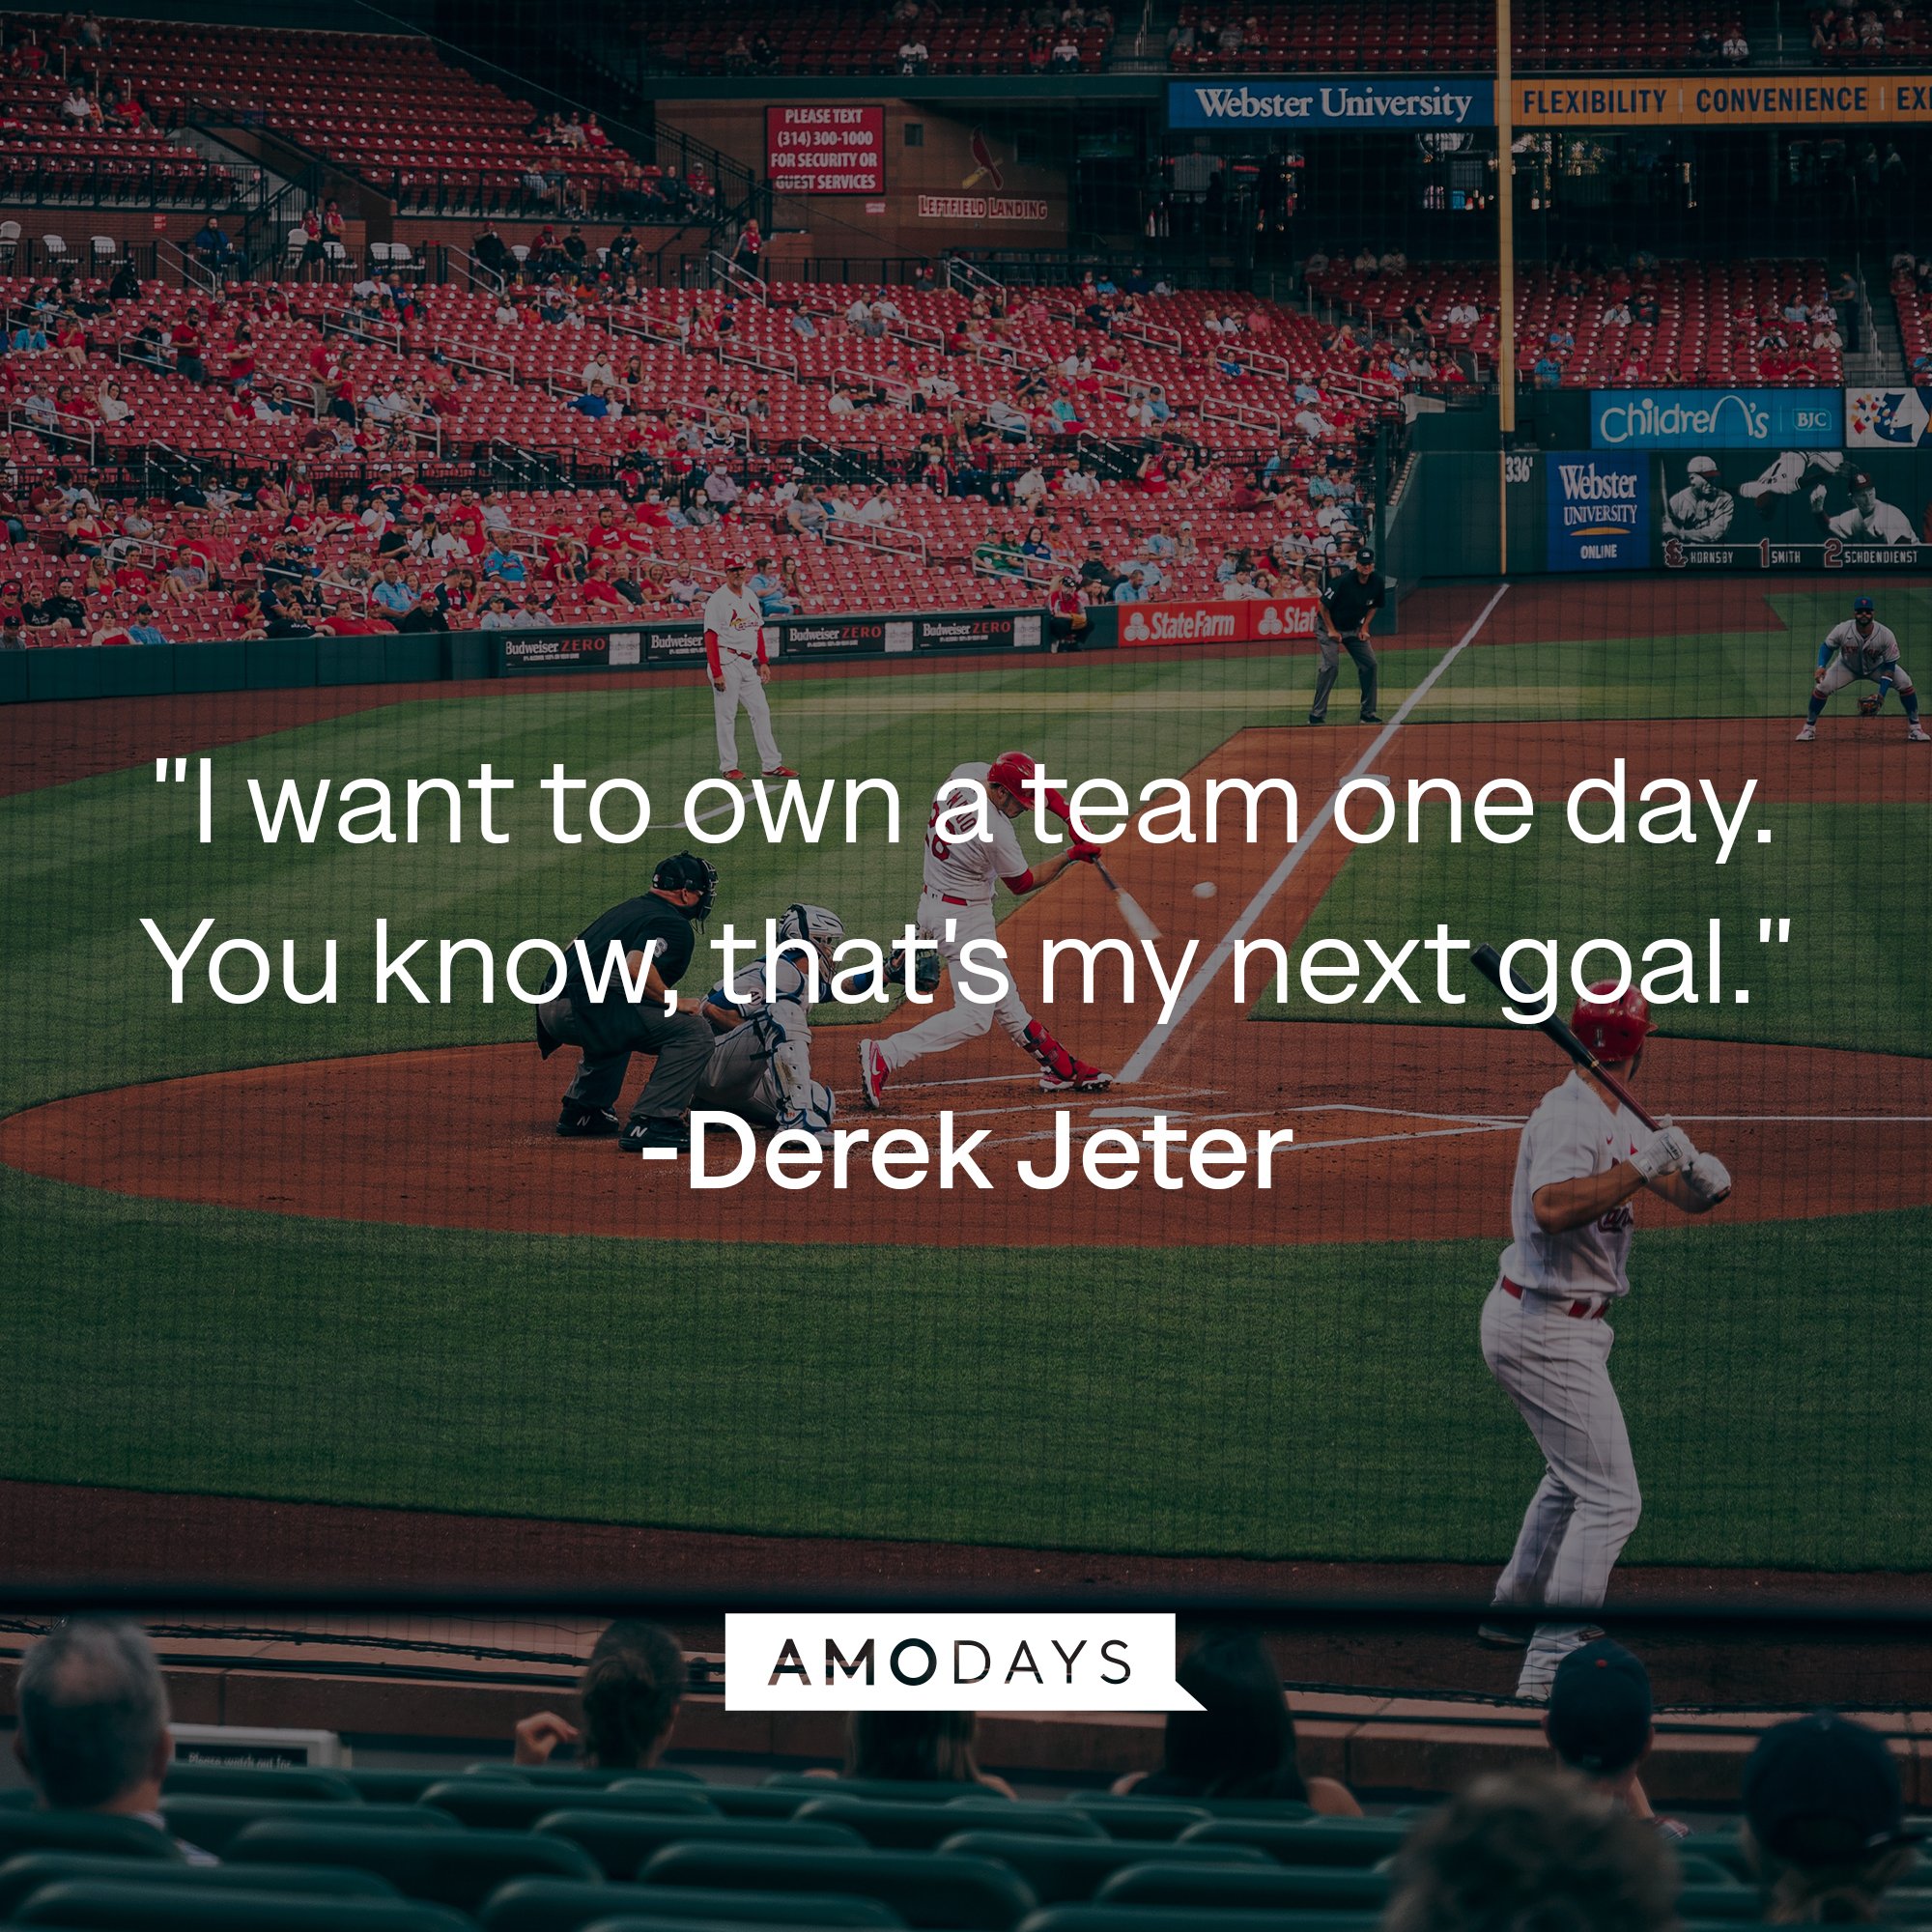 Derek Jeter's quote: "I want to own a team one day. You know, that's my next goal." | Image: AmoDays